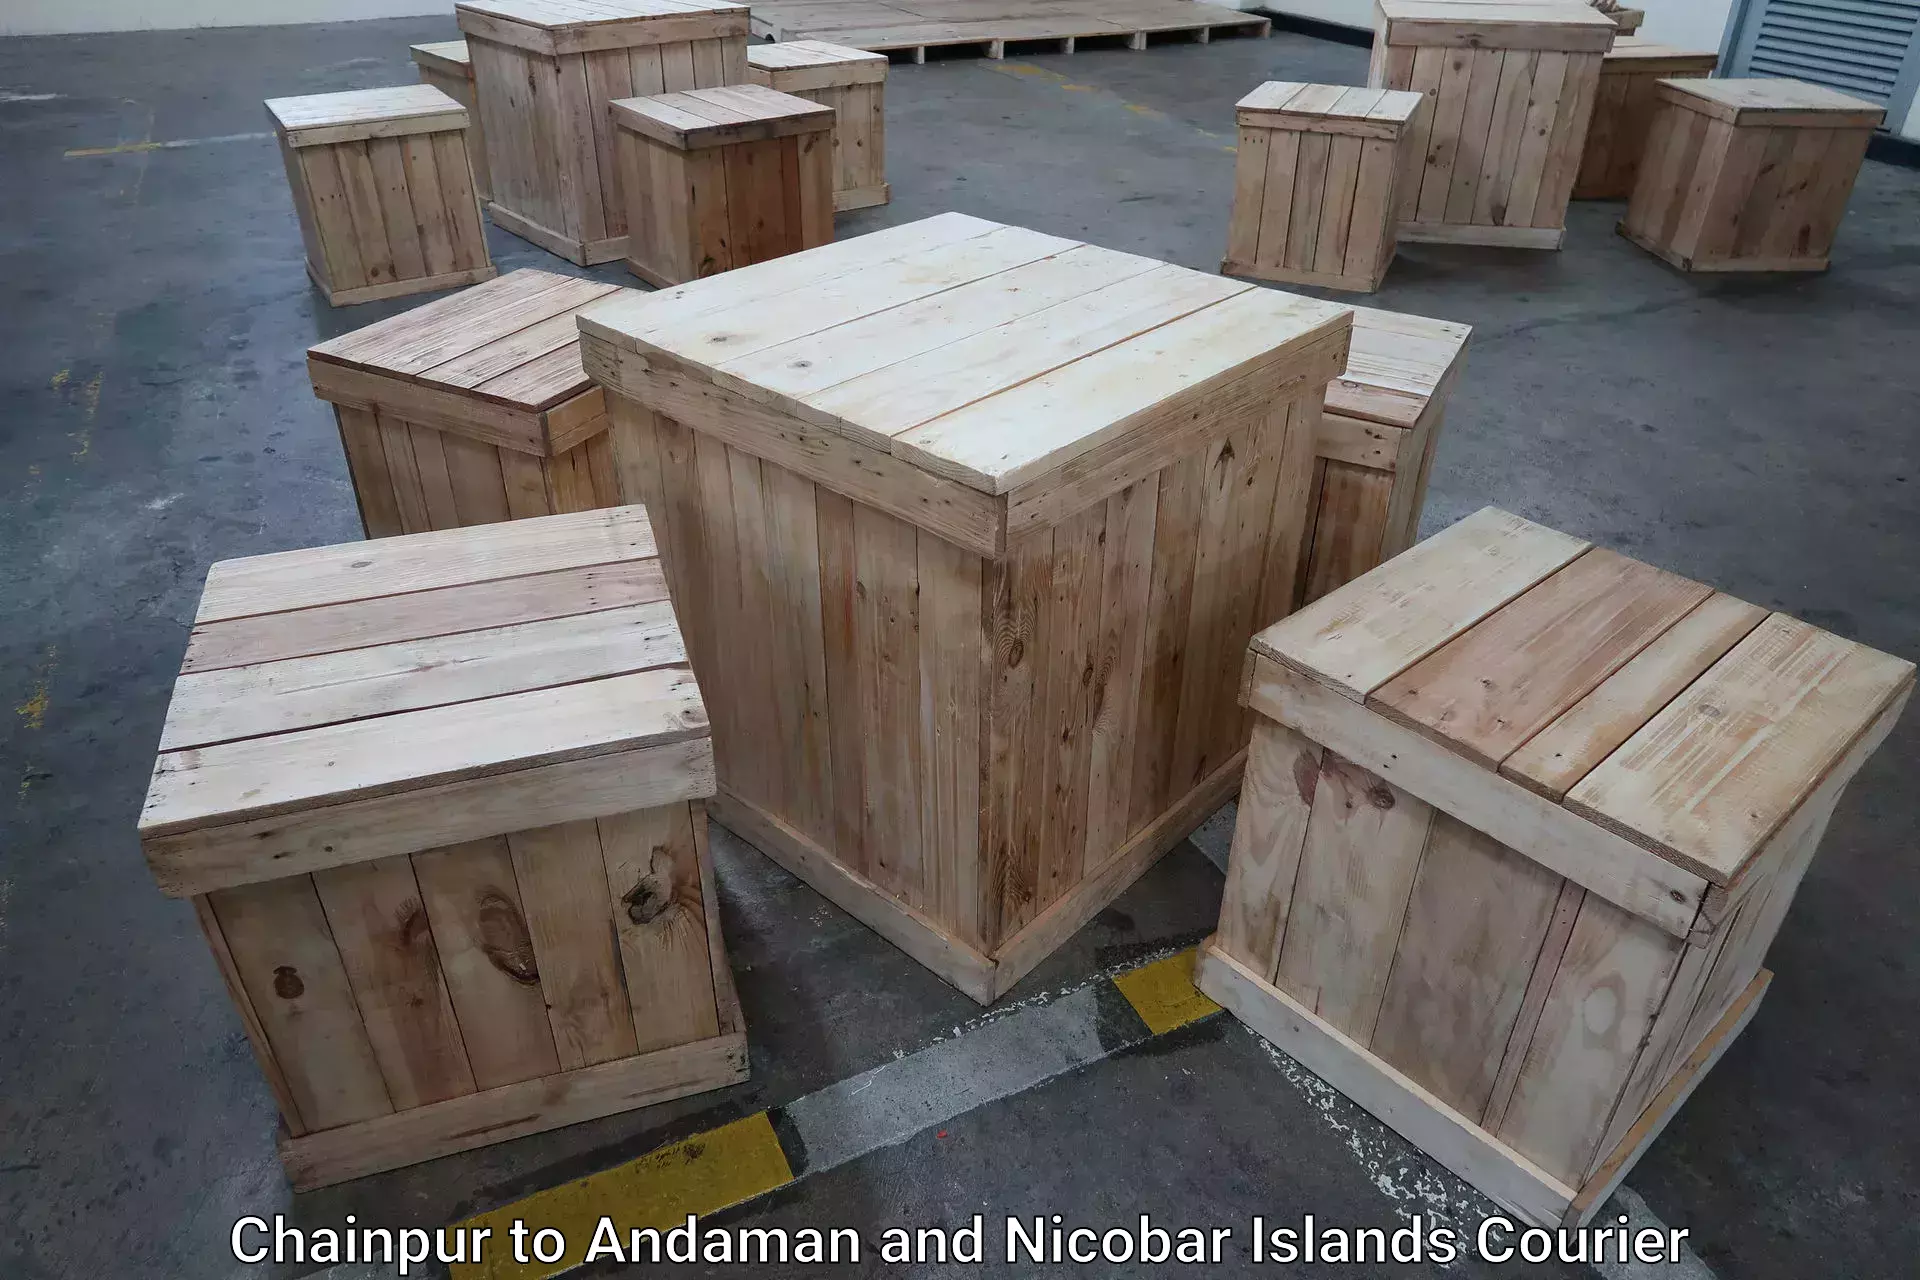 Luggage delivery network Chainpur to Andaman and Nicobar Islands